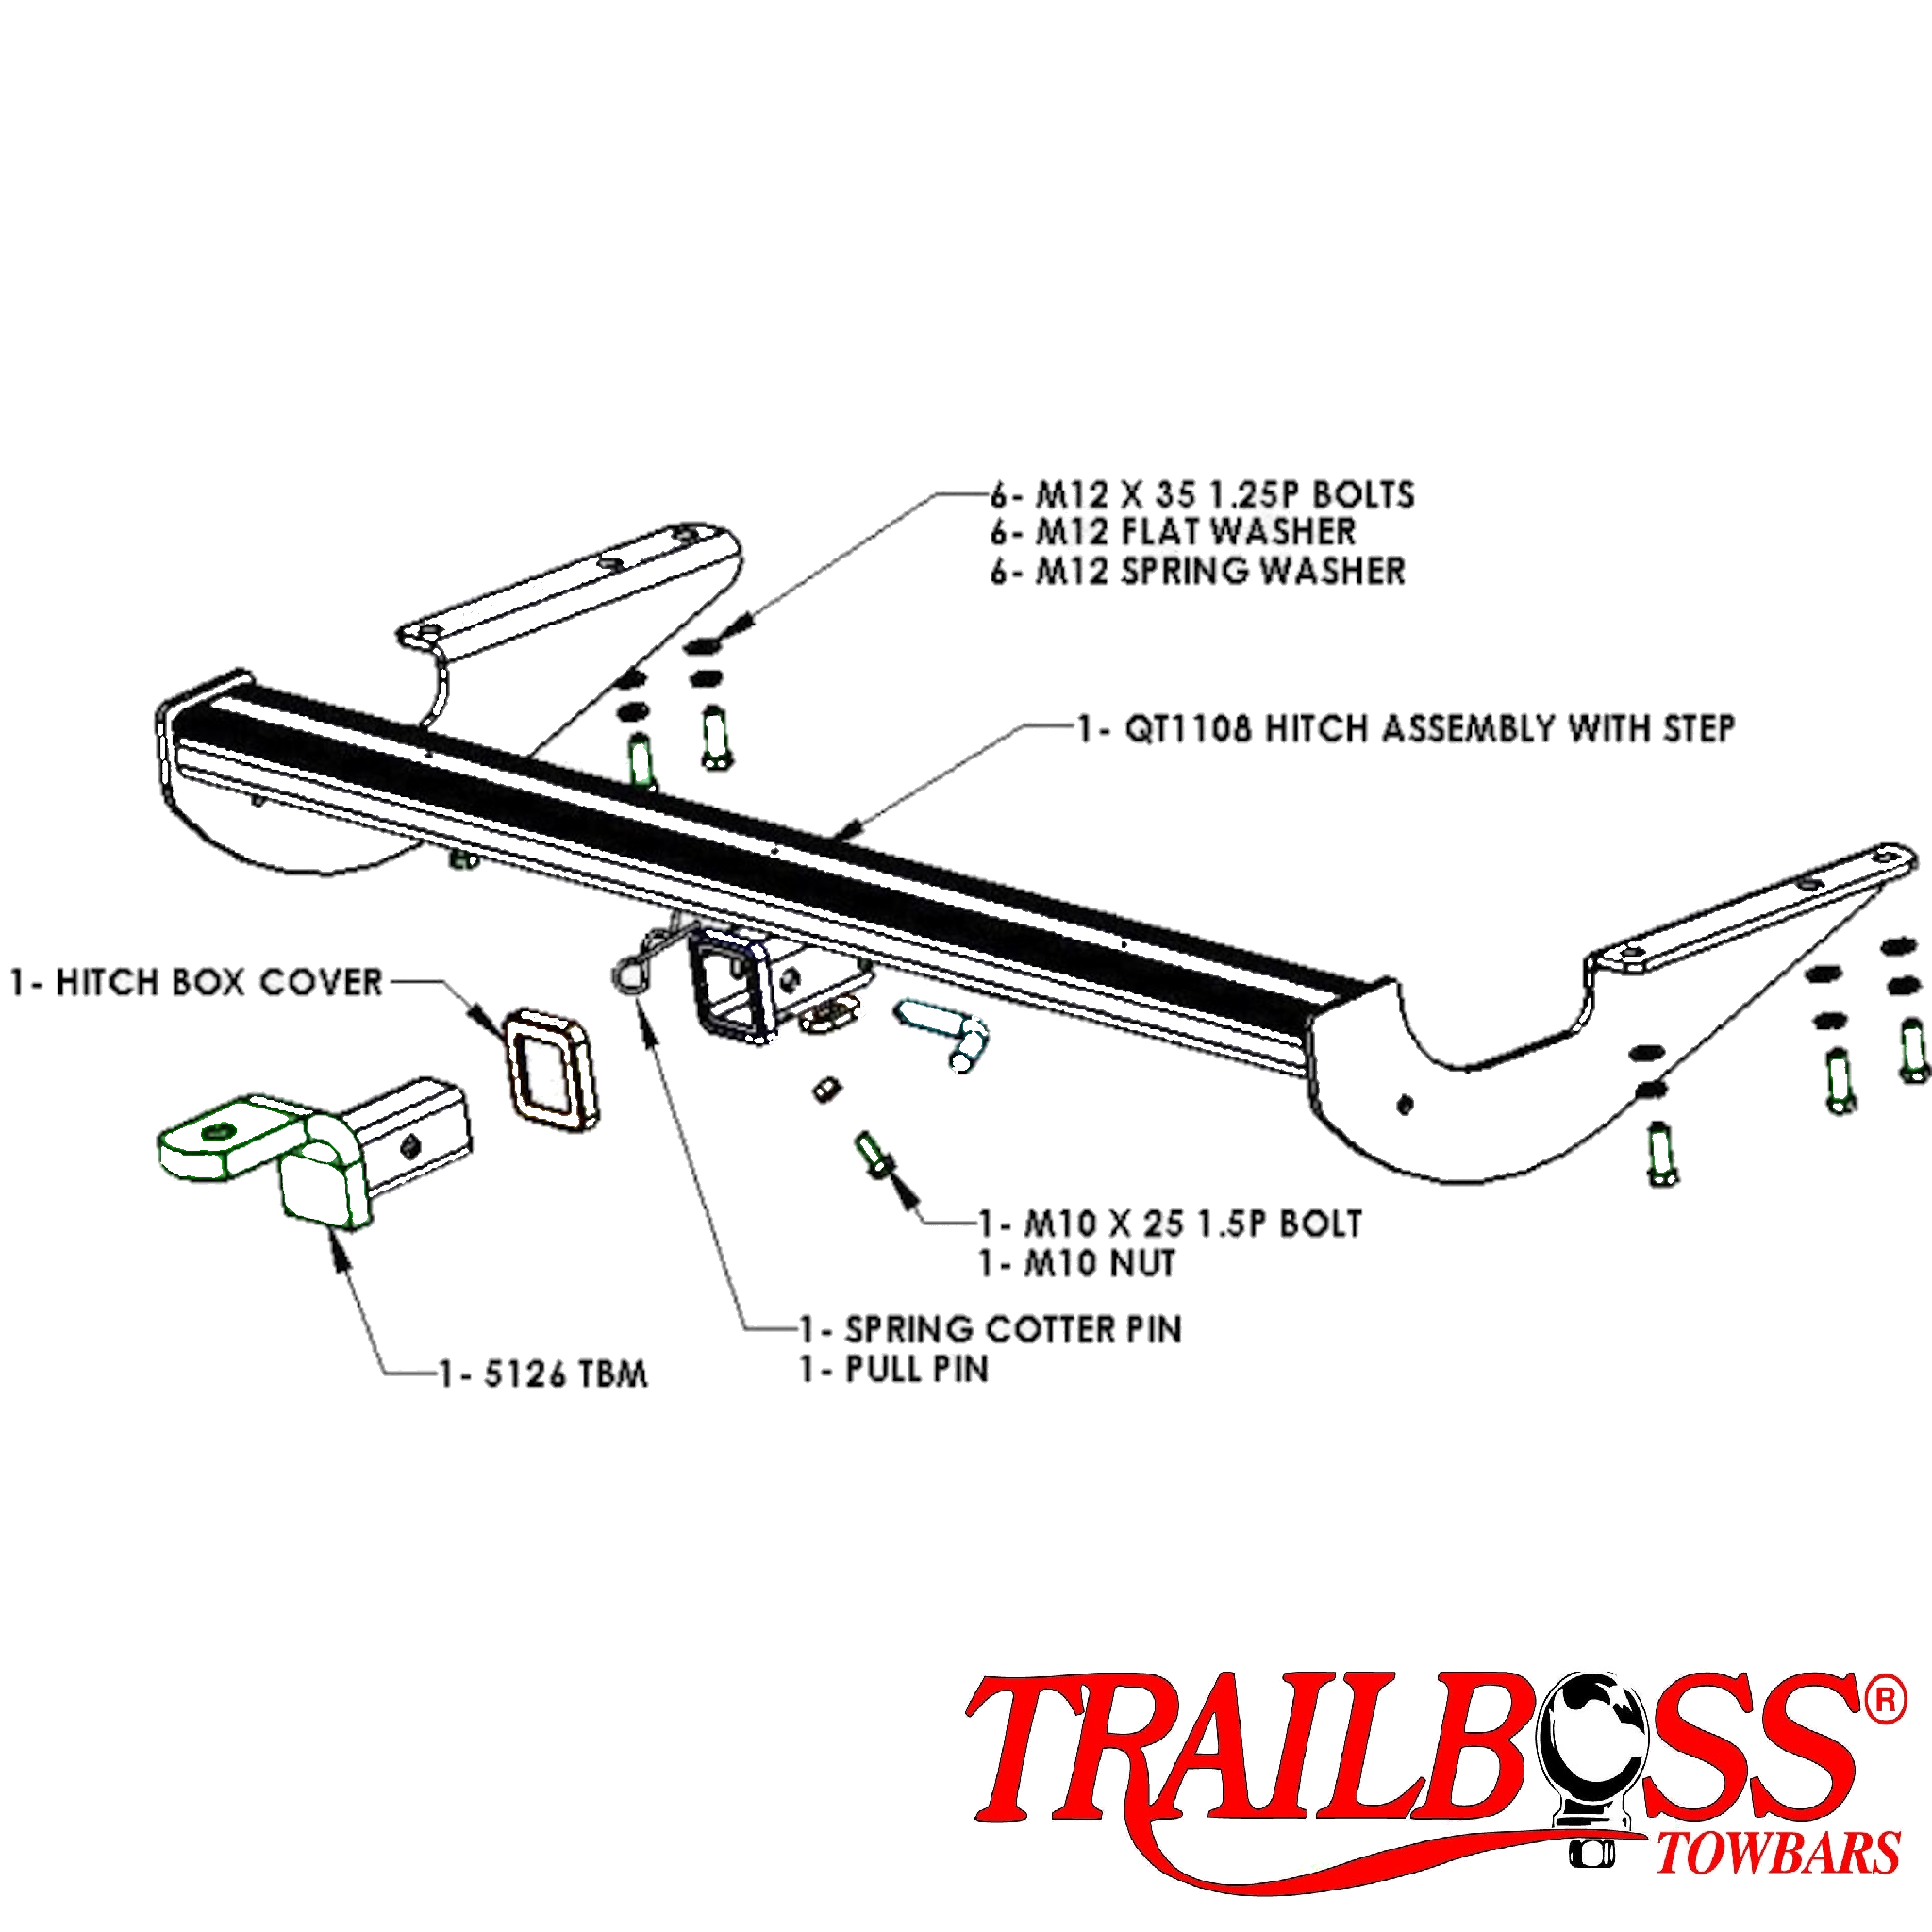 Toyota Tarago People Mover 03/2006 - 06/2021 (Comes with rear step) - Towbar Kit - HEAVY DUTY PREMIUM